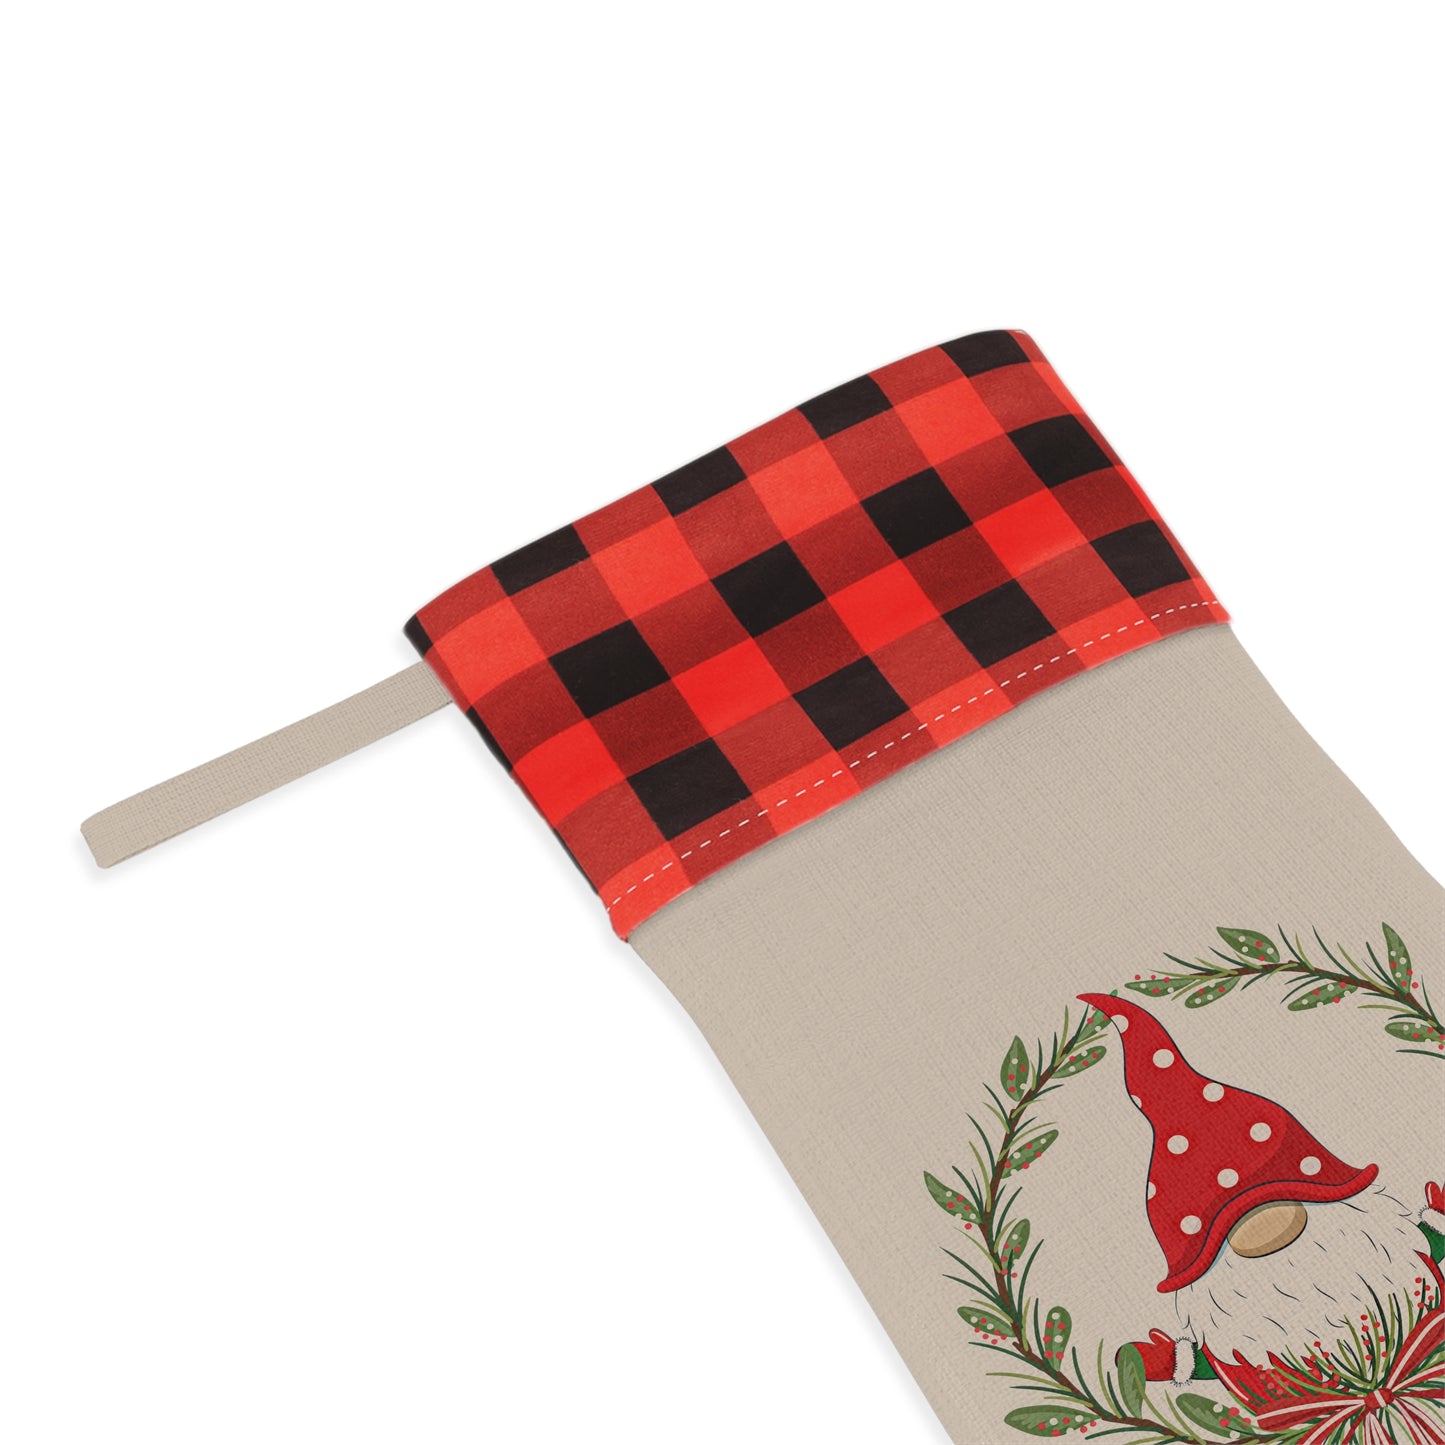 A personalized Holiday-Gnome Christmas Stocking with a red and black plaid design from Printify.